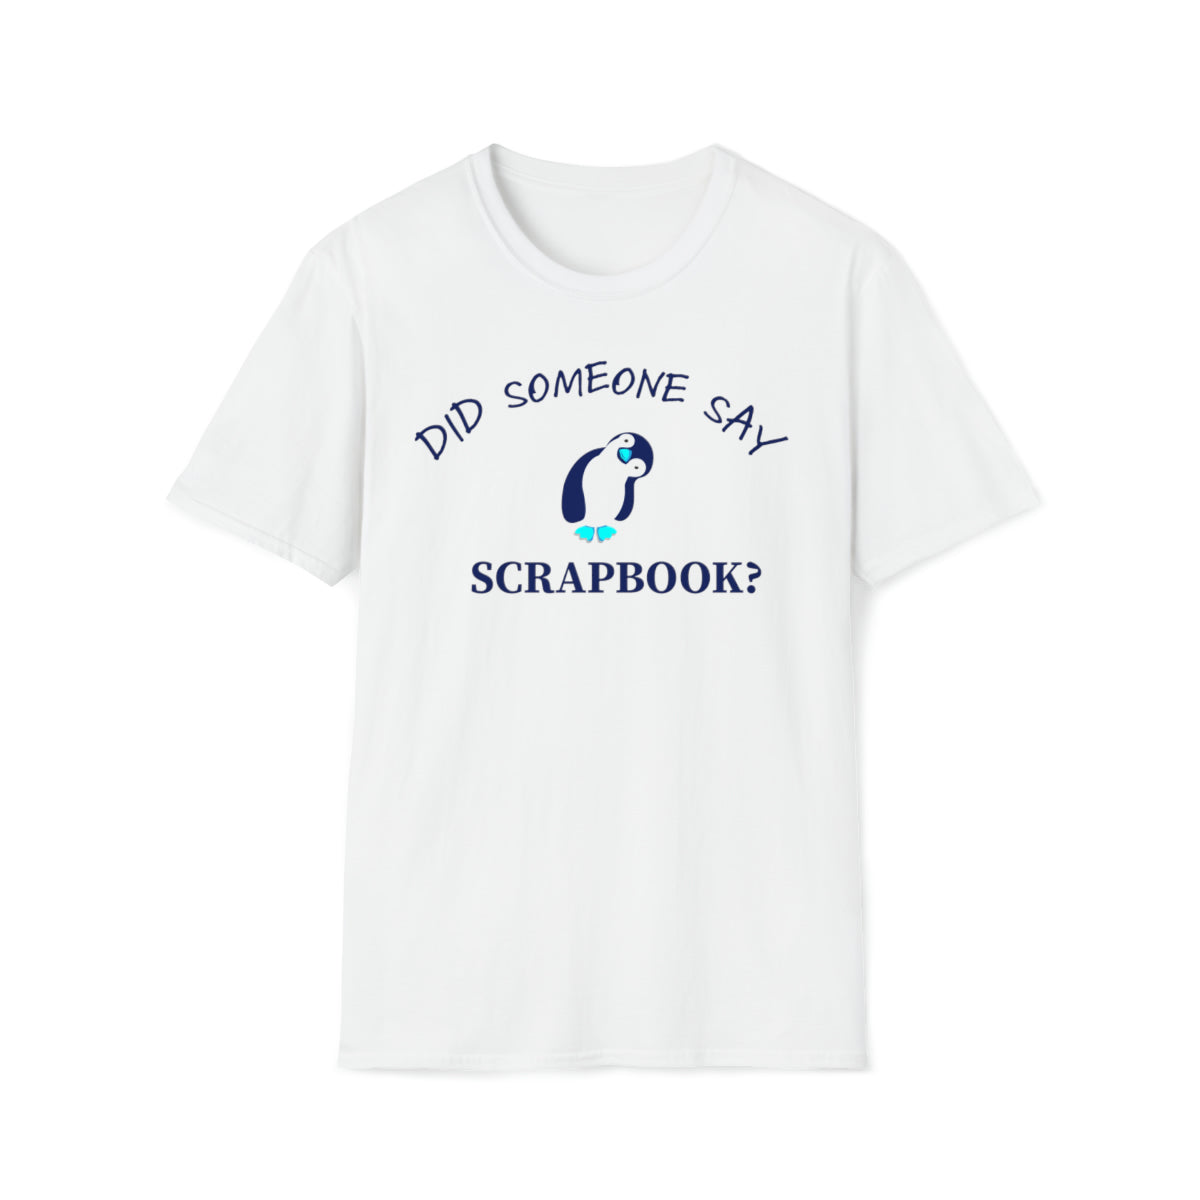 Did Someone Say Scrapbook? - Short Sleeve Unisex Soft Style T-Shirt